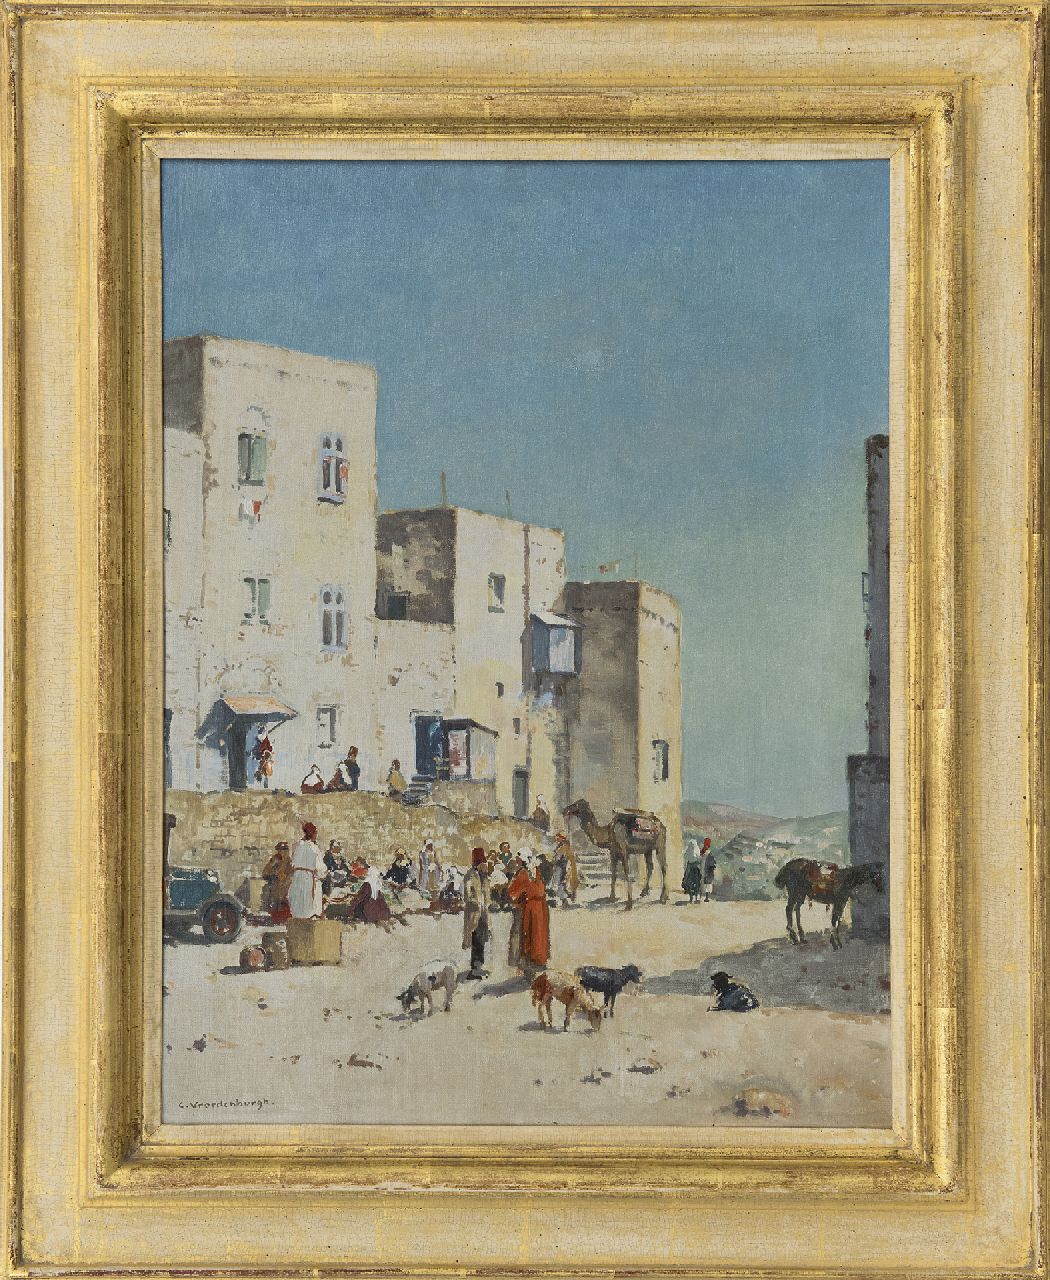 Vreedenburgh C.  | Cornelis Vreedenburgh | Paintings offered for sale | Village in Palestine, presumably Bethlehem, oil on canvas 50.9 x 38.2 cm, signed l.l. and painted ca. 1936